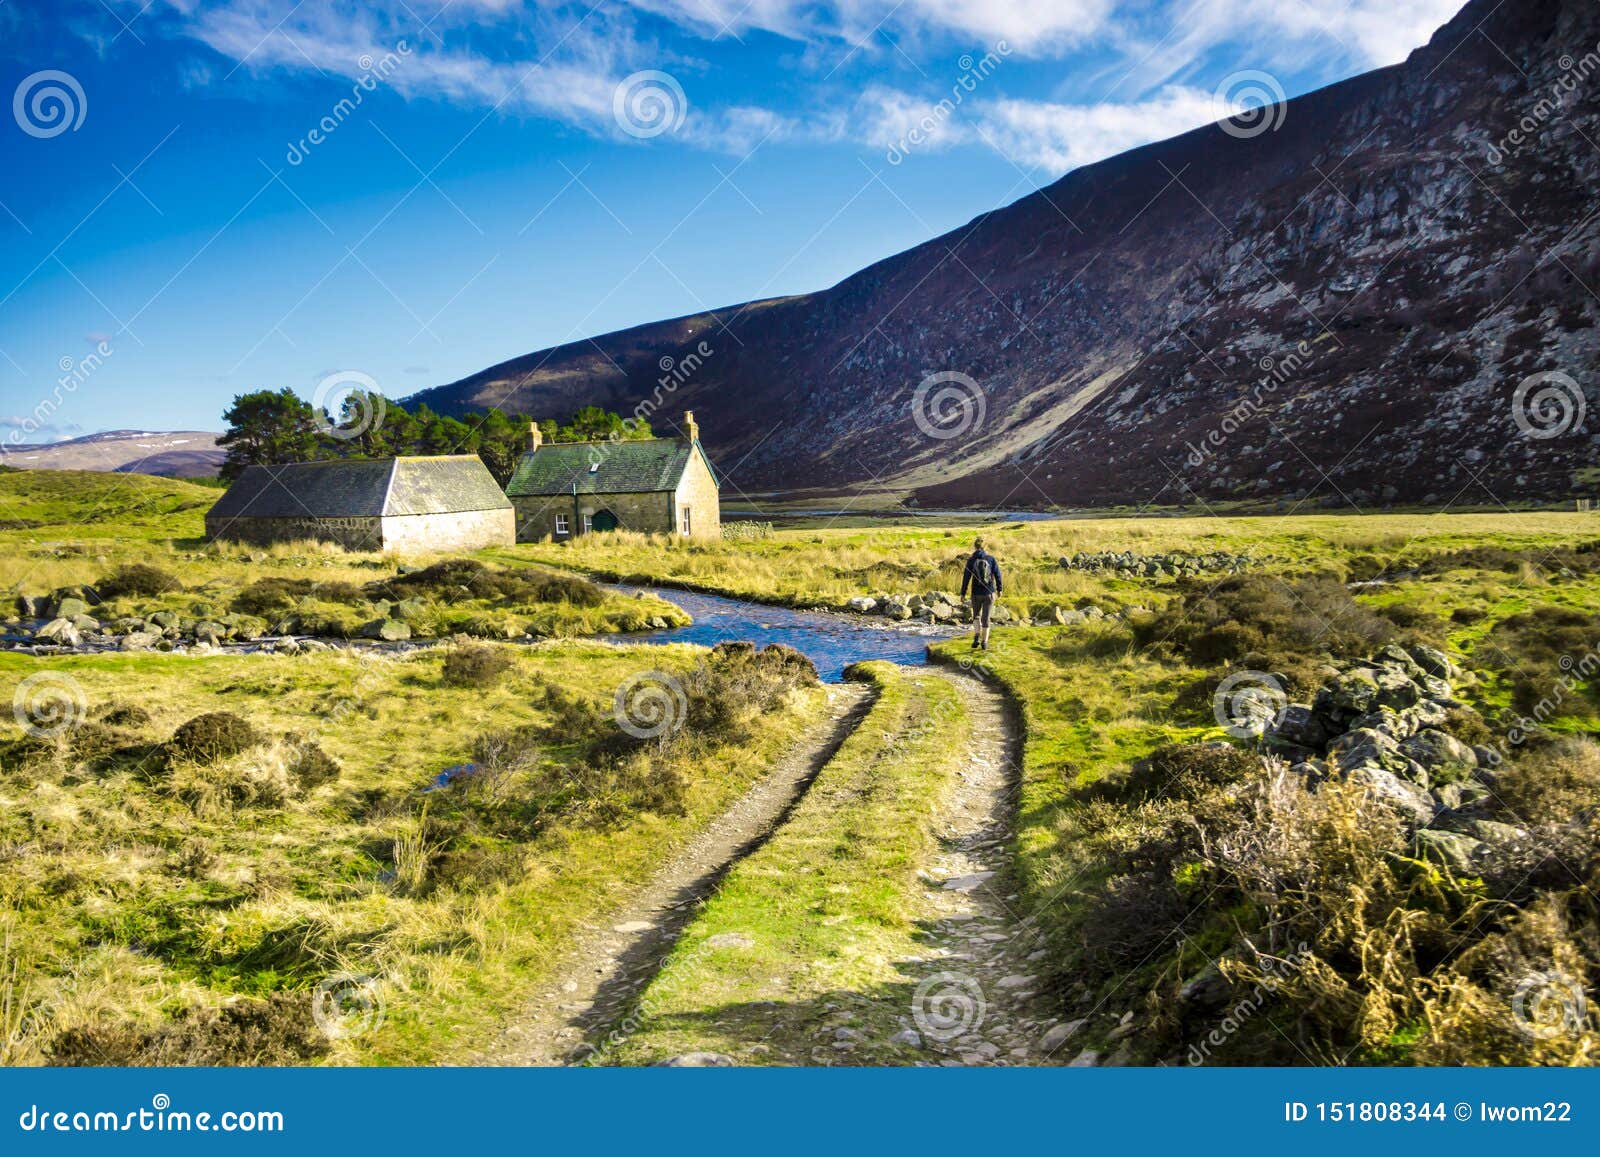 Hiking Trail In Cairngorms National Park Scotland Uk Stock Photo